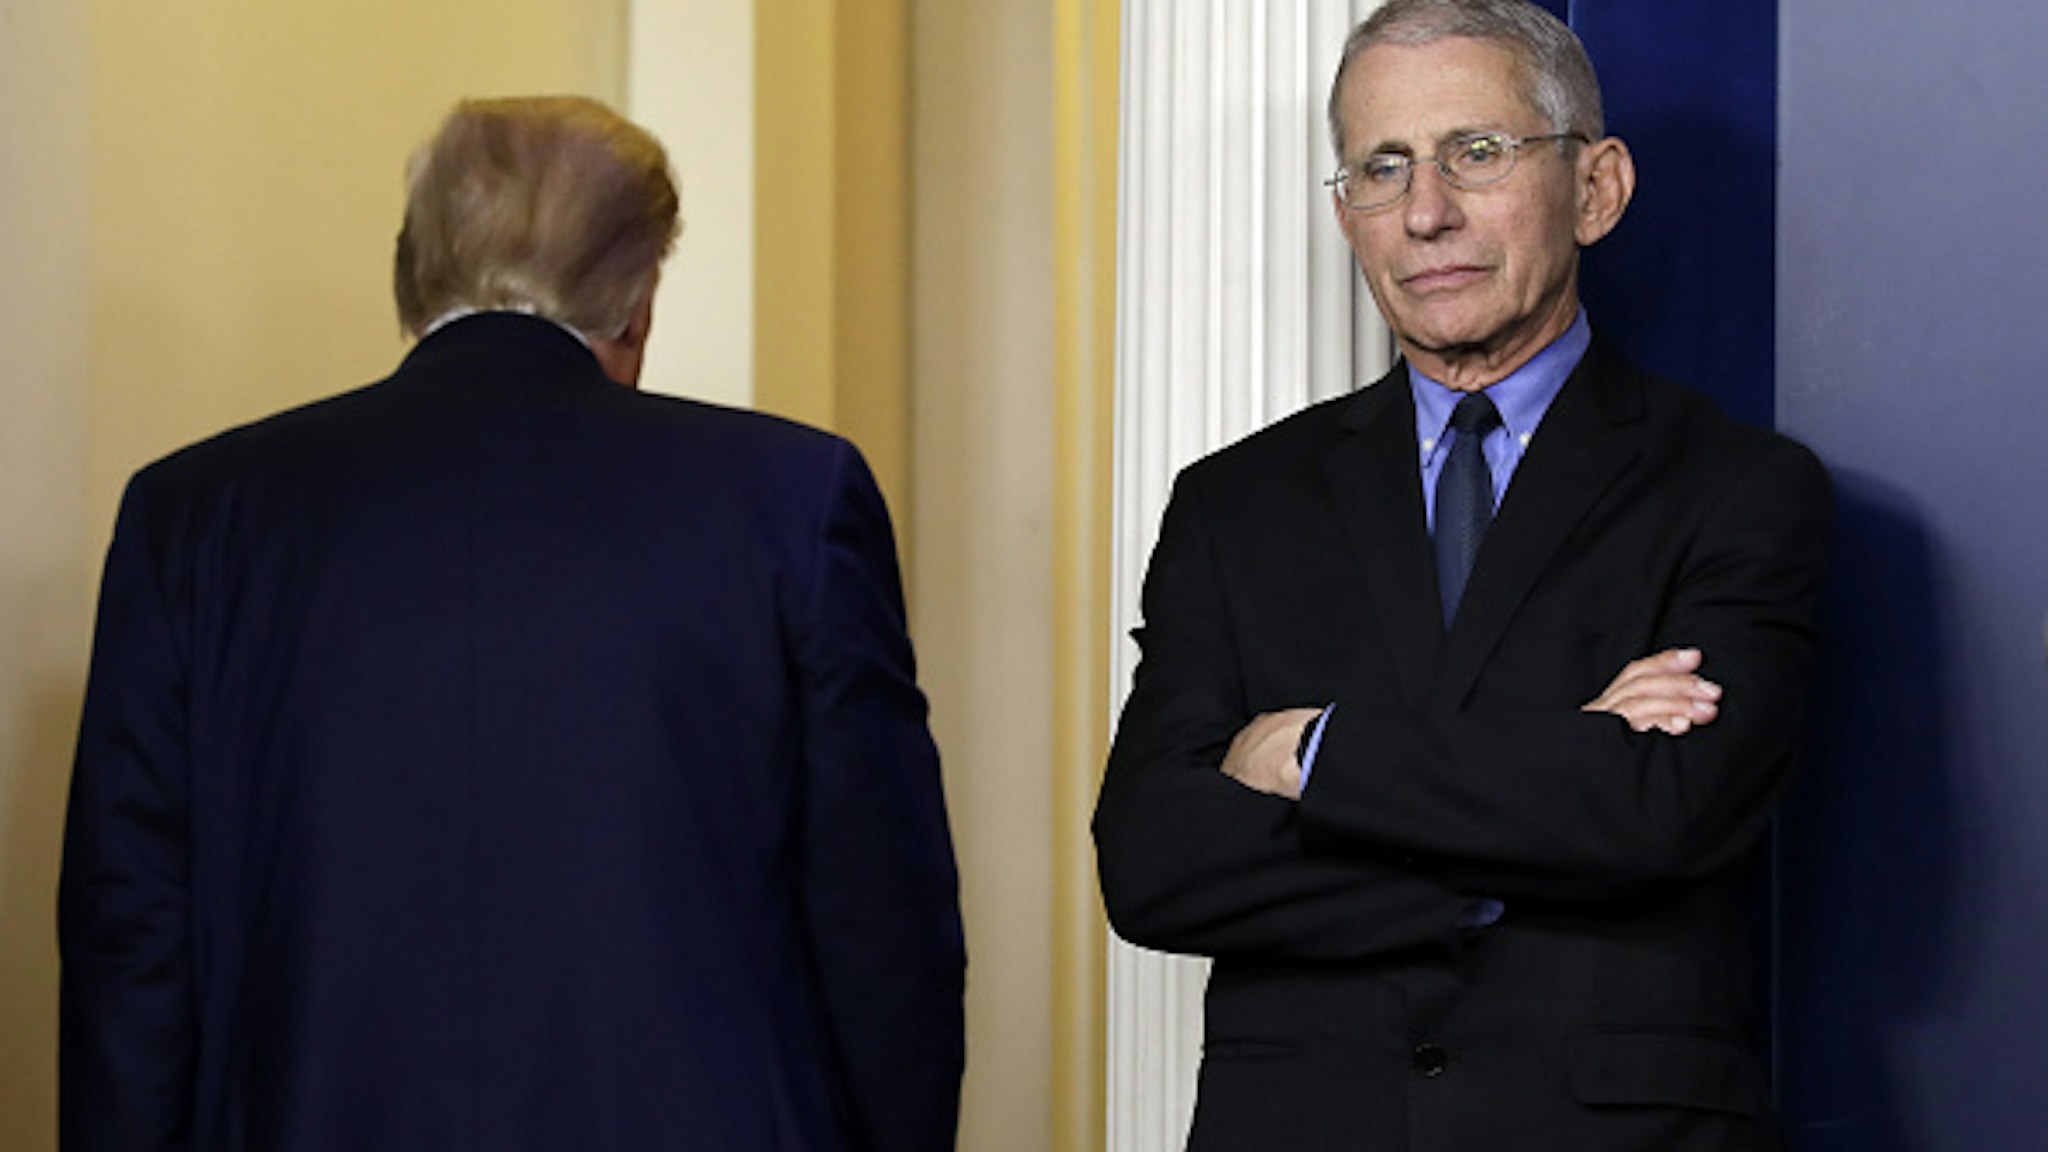 Bloomberg Best of the Year 2020: Anthony Fauci, director of the National Institute of Allergy and Infectious Diseases, right, stands as U.S. President Donald Trump exits during a Coronavirus Task Force news conference at the White House in Washington, D.C., U.S., on Thursday, March 26, 2020.